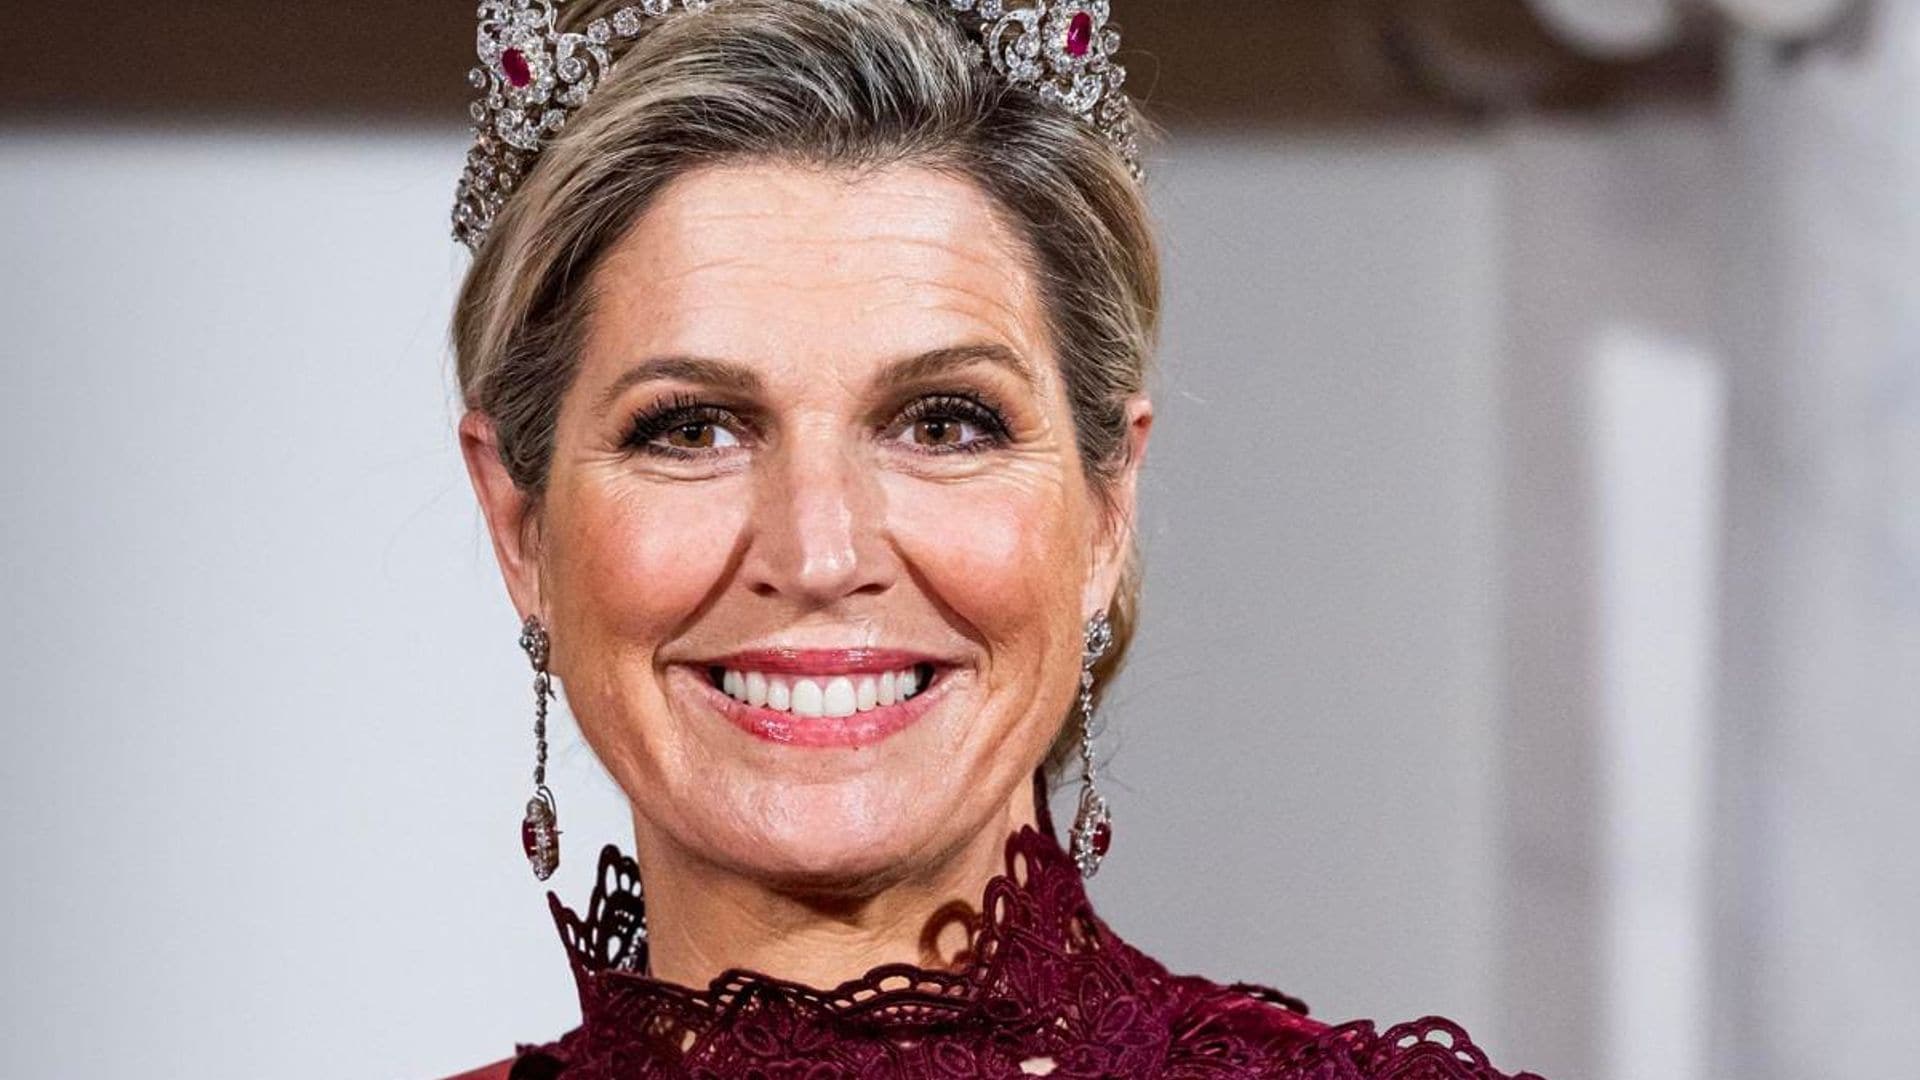 Queen Maxima looks regal in ruby tiara and gown at state banquet